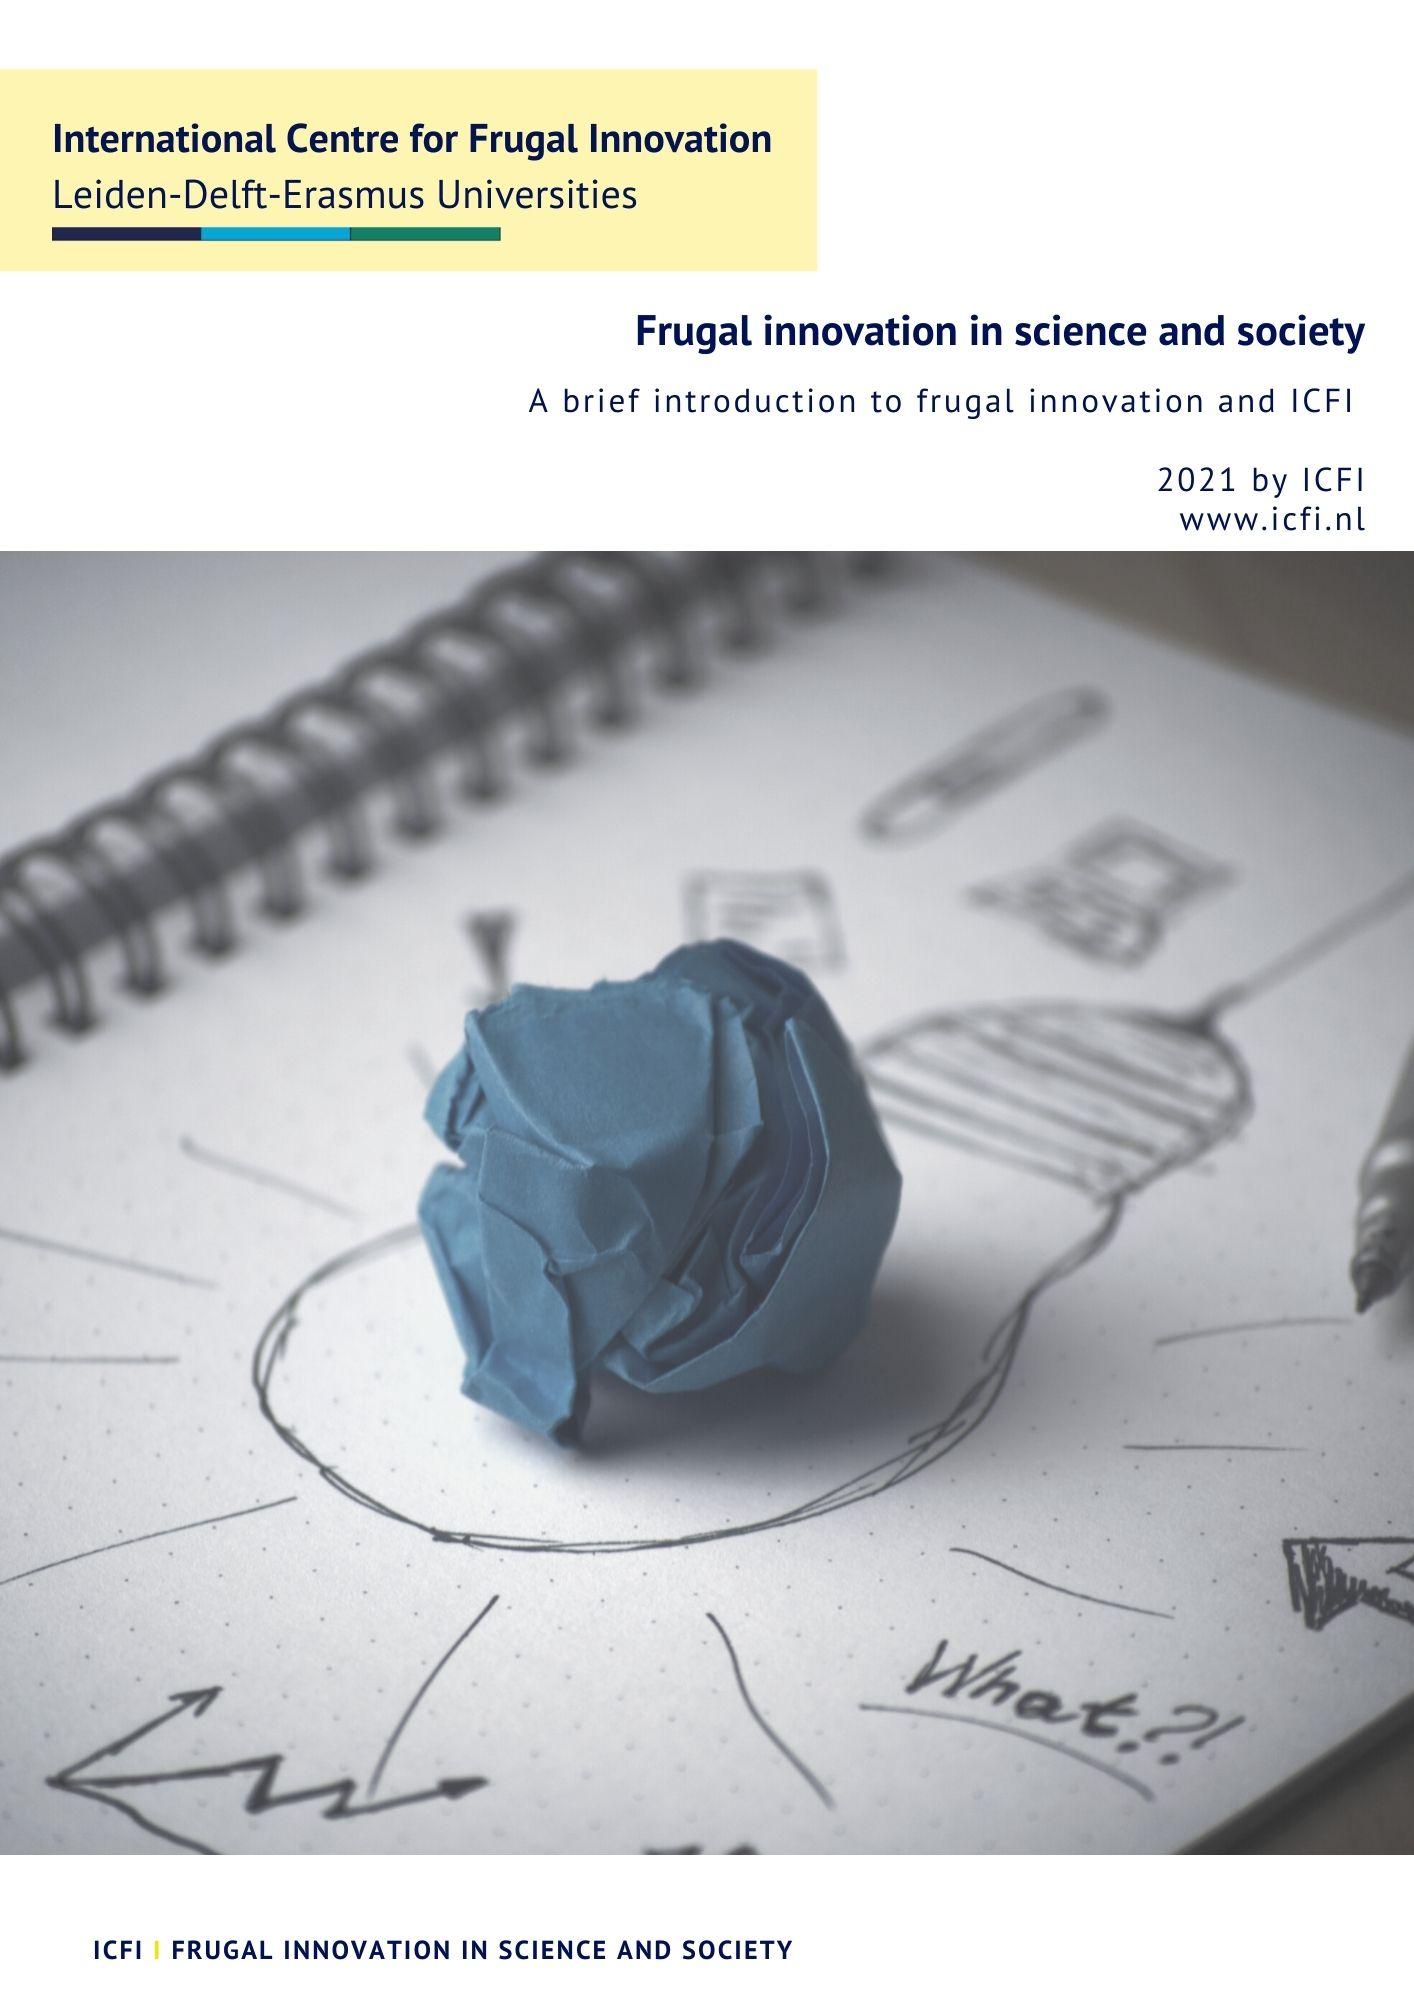 Frugal Innovation in science and society white paper